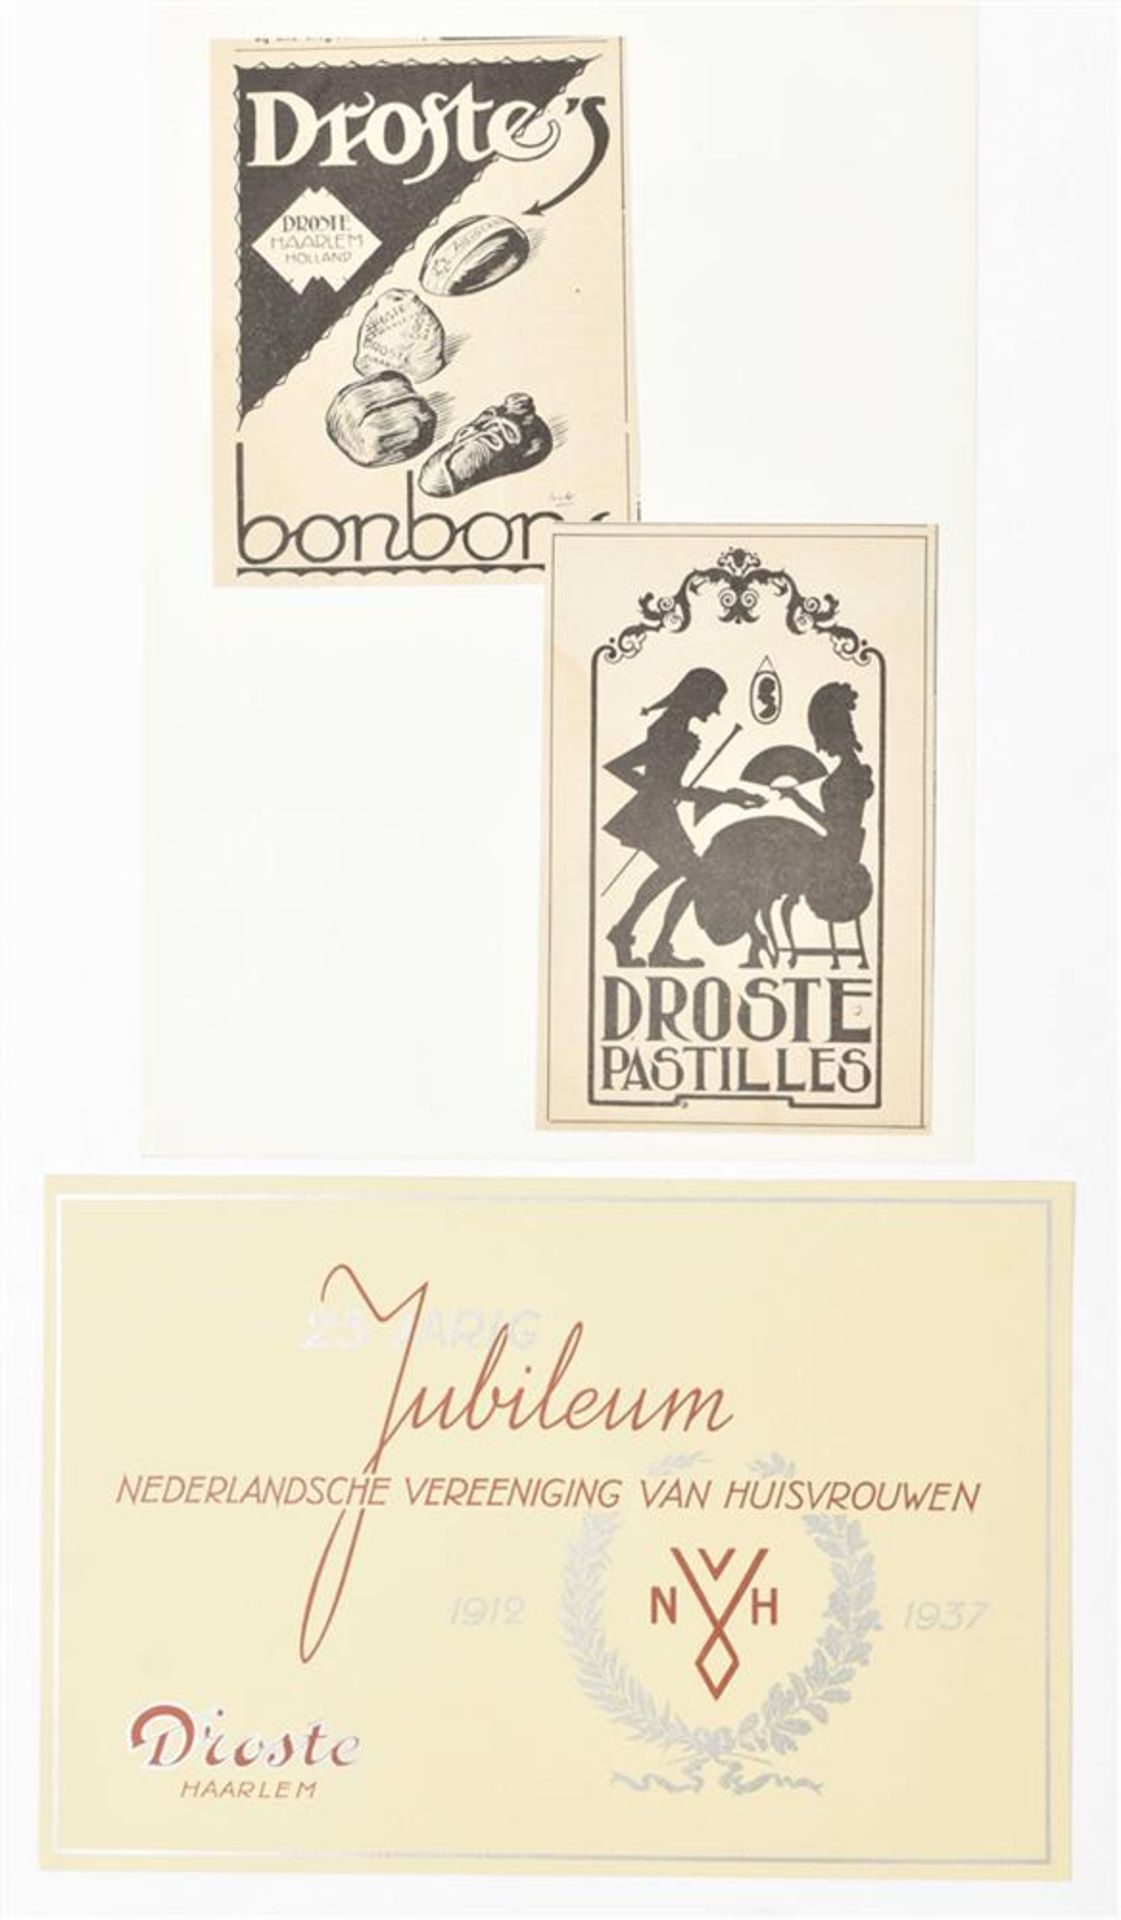 [Chocolate] Droste bonbon labels, designs and other ephemera - Image 5 of 8